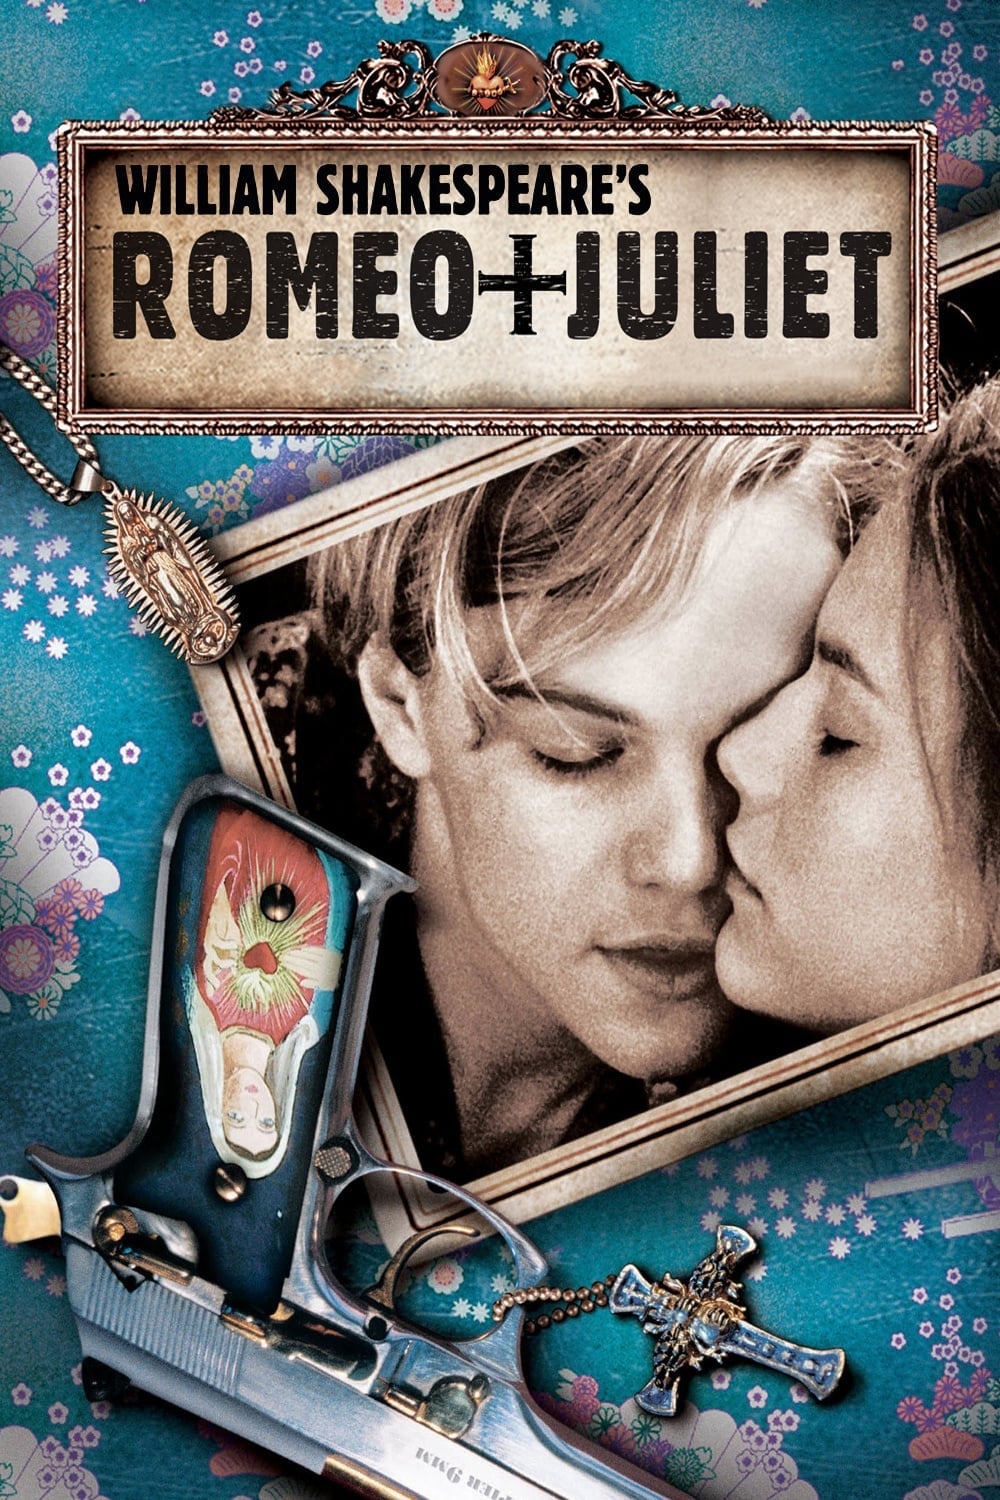 Poster for the movie "Romeo + Juliet"